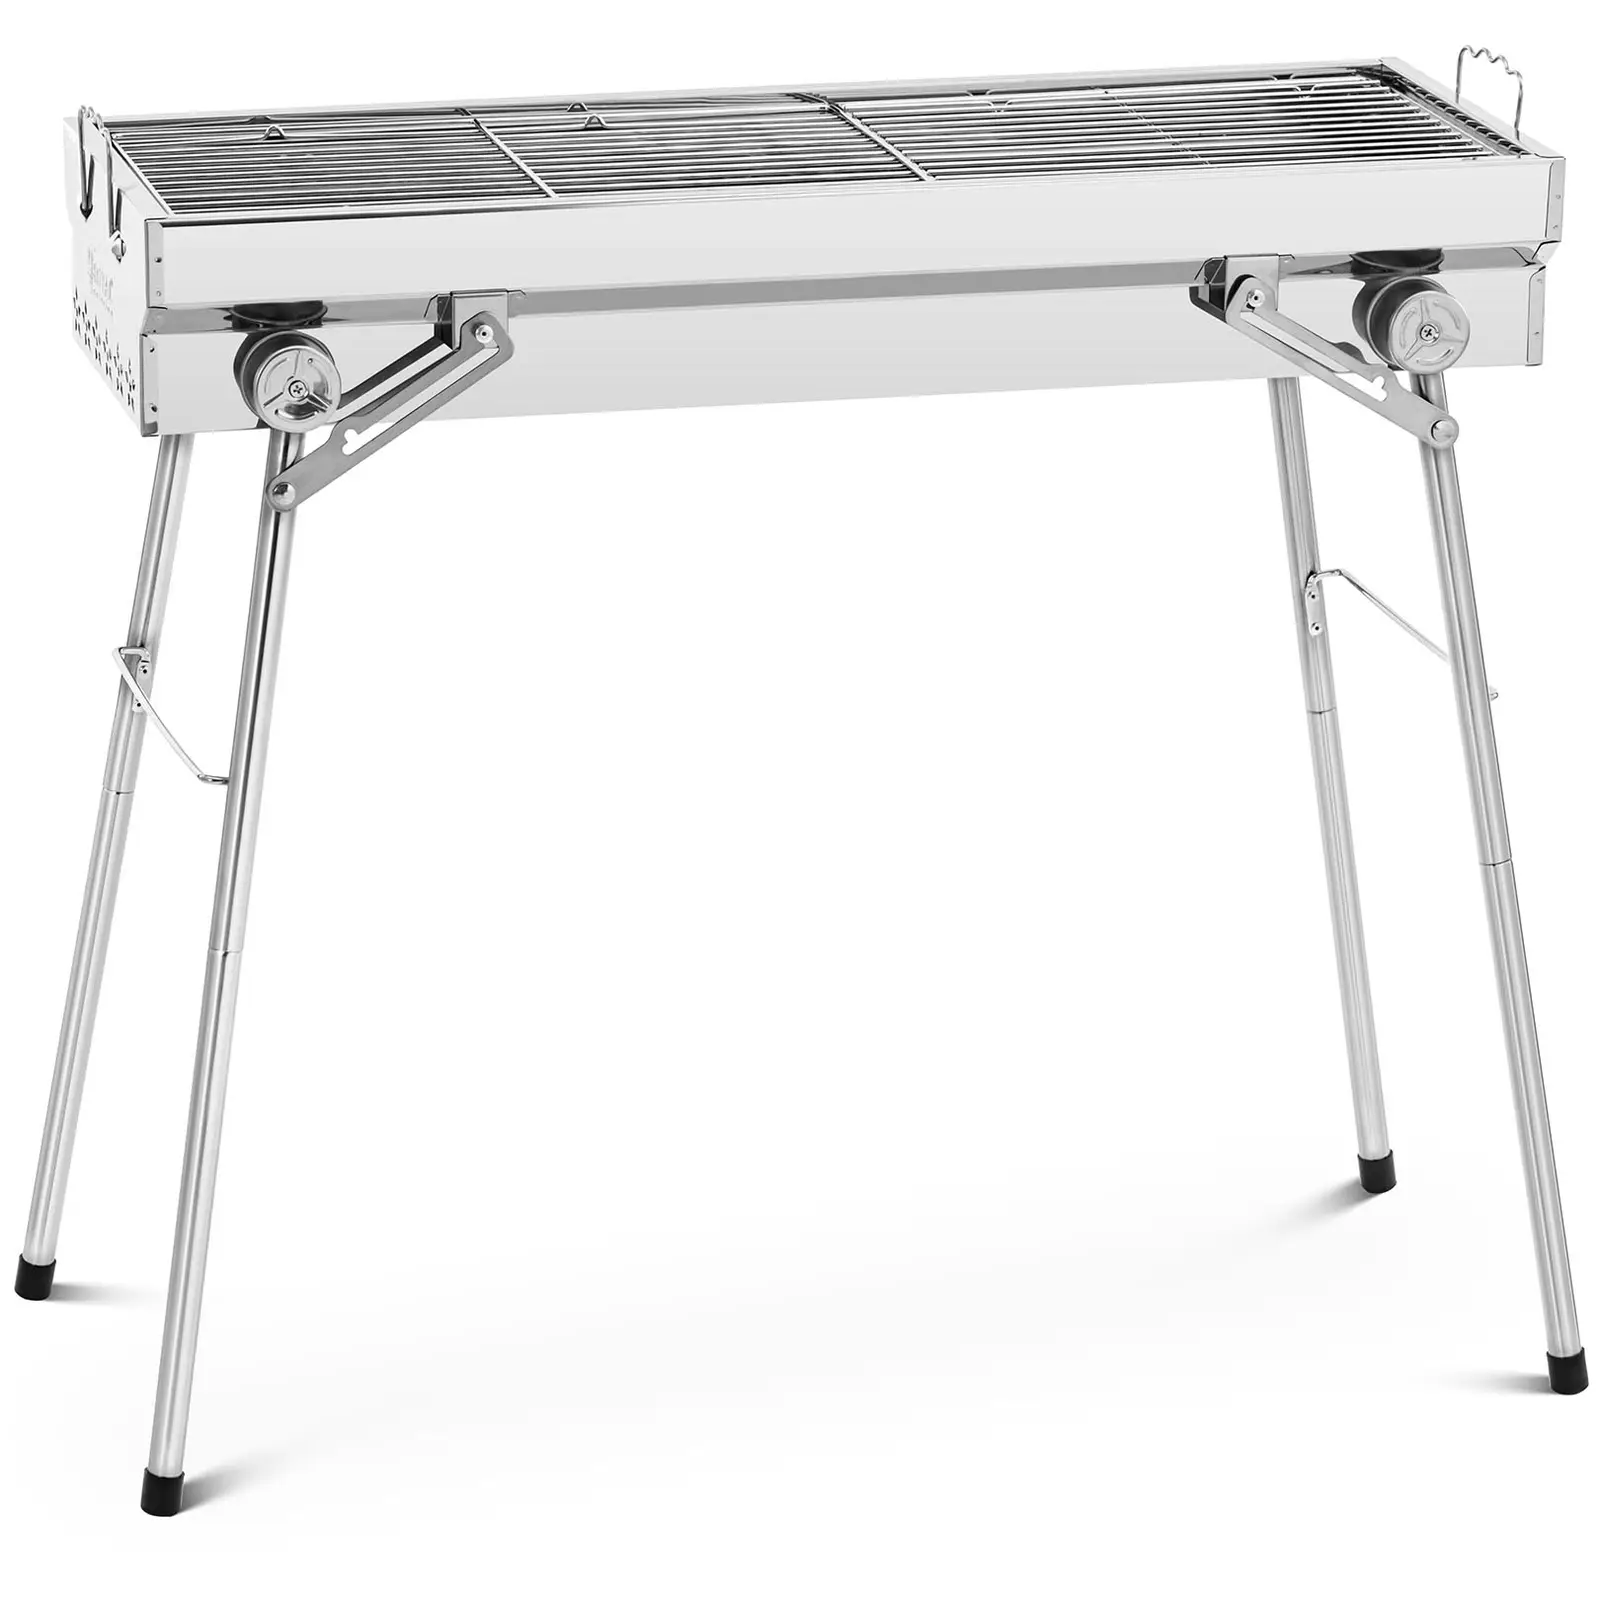 Charcoal grill - with grill - 75 x 26 cm - stainless steel / galvanised steel - Royal Catering